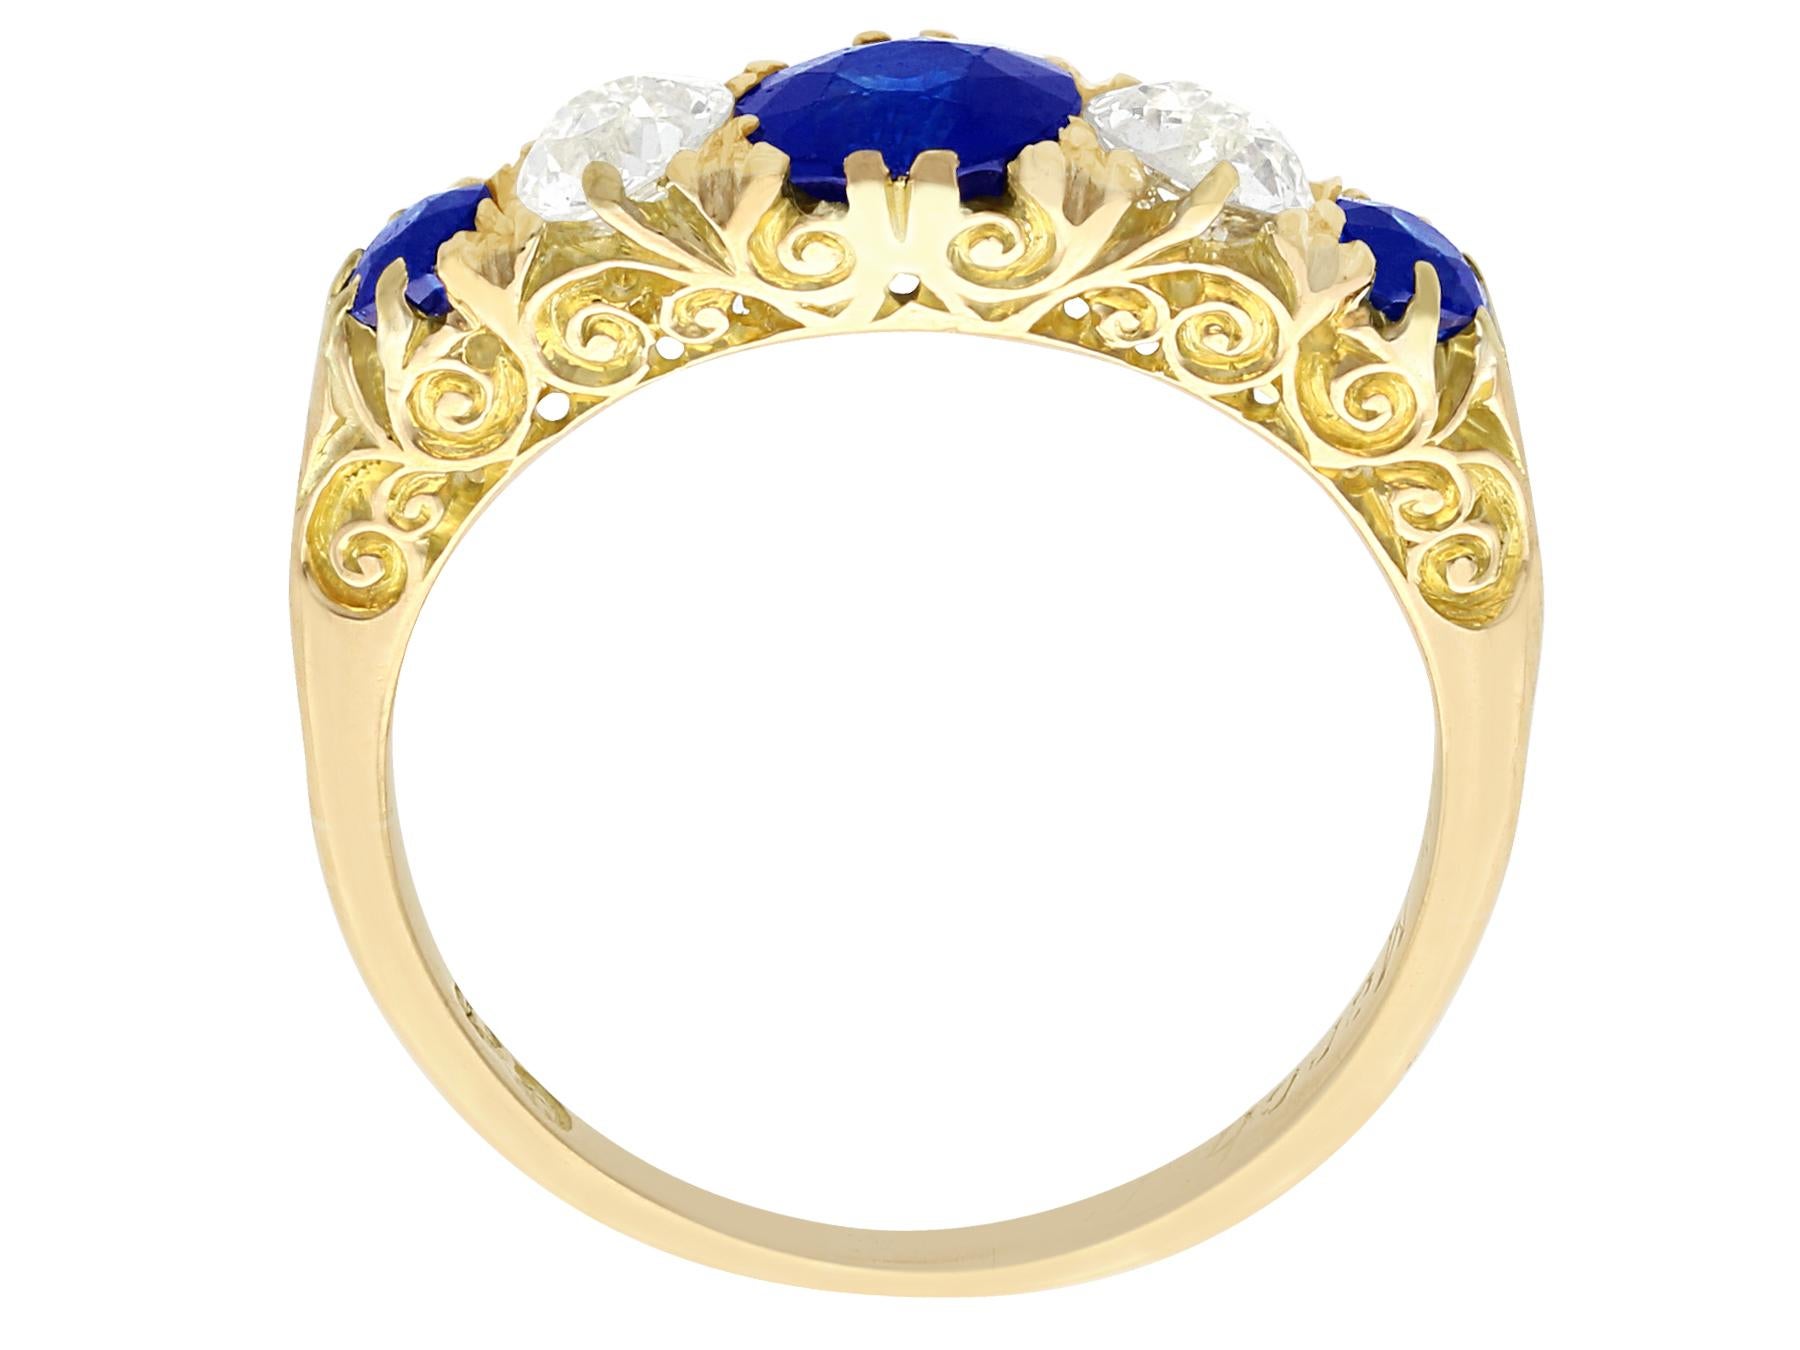 Women's Antique 1.39 Carat Sapphire and Diamond Yellow Gold Five-Stone Ring